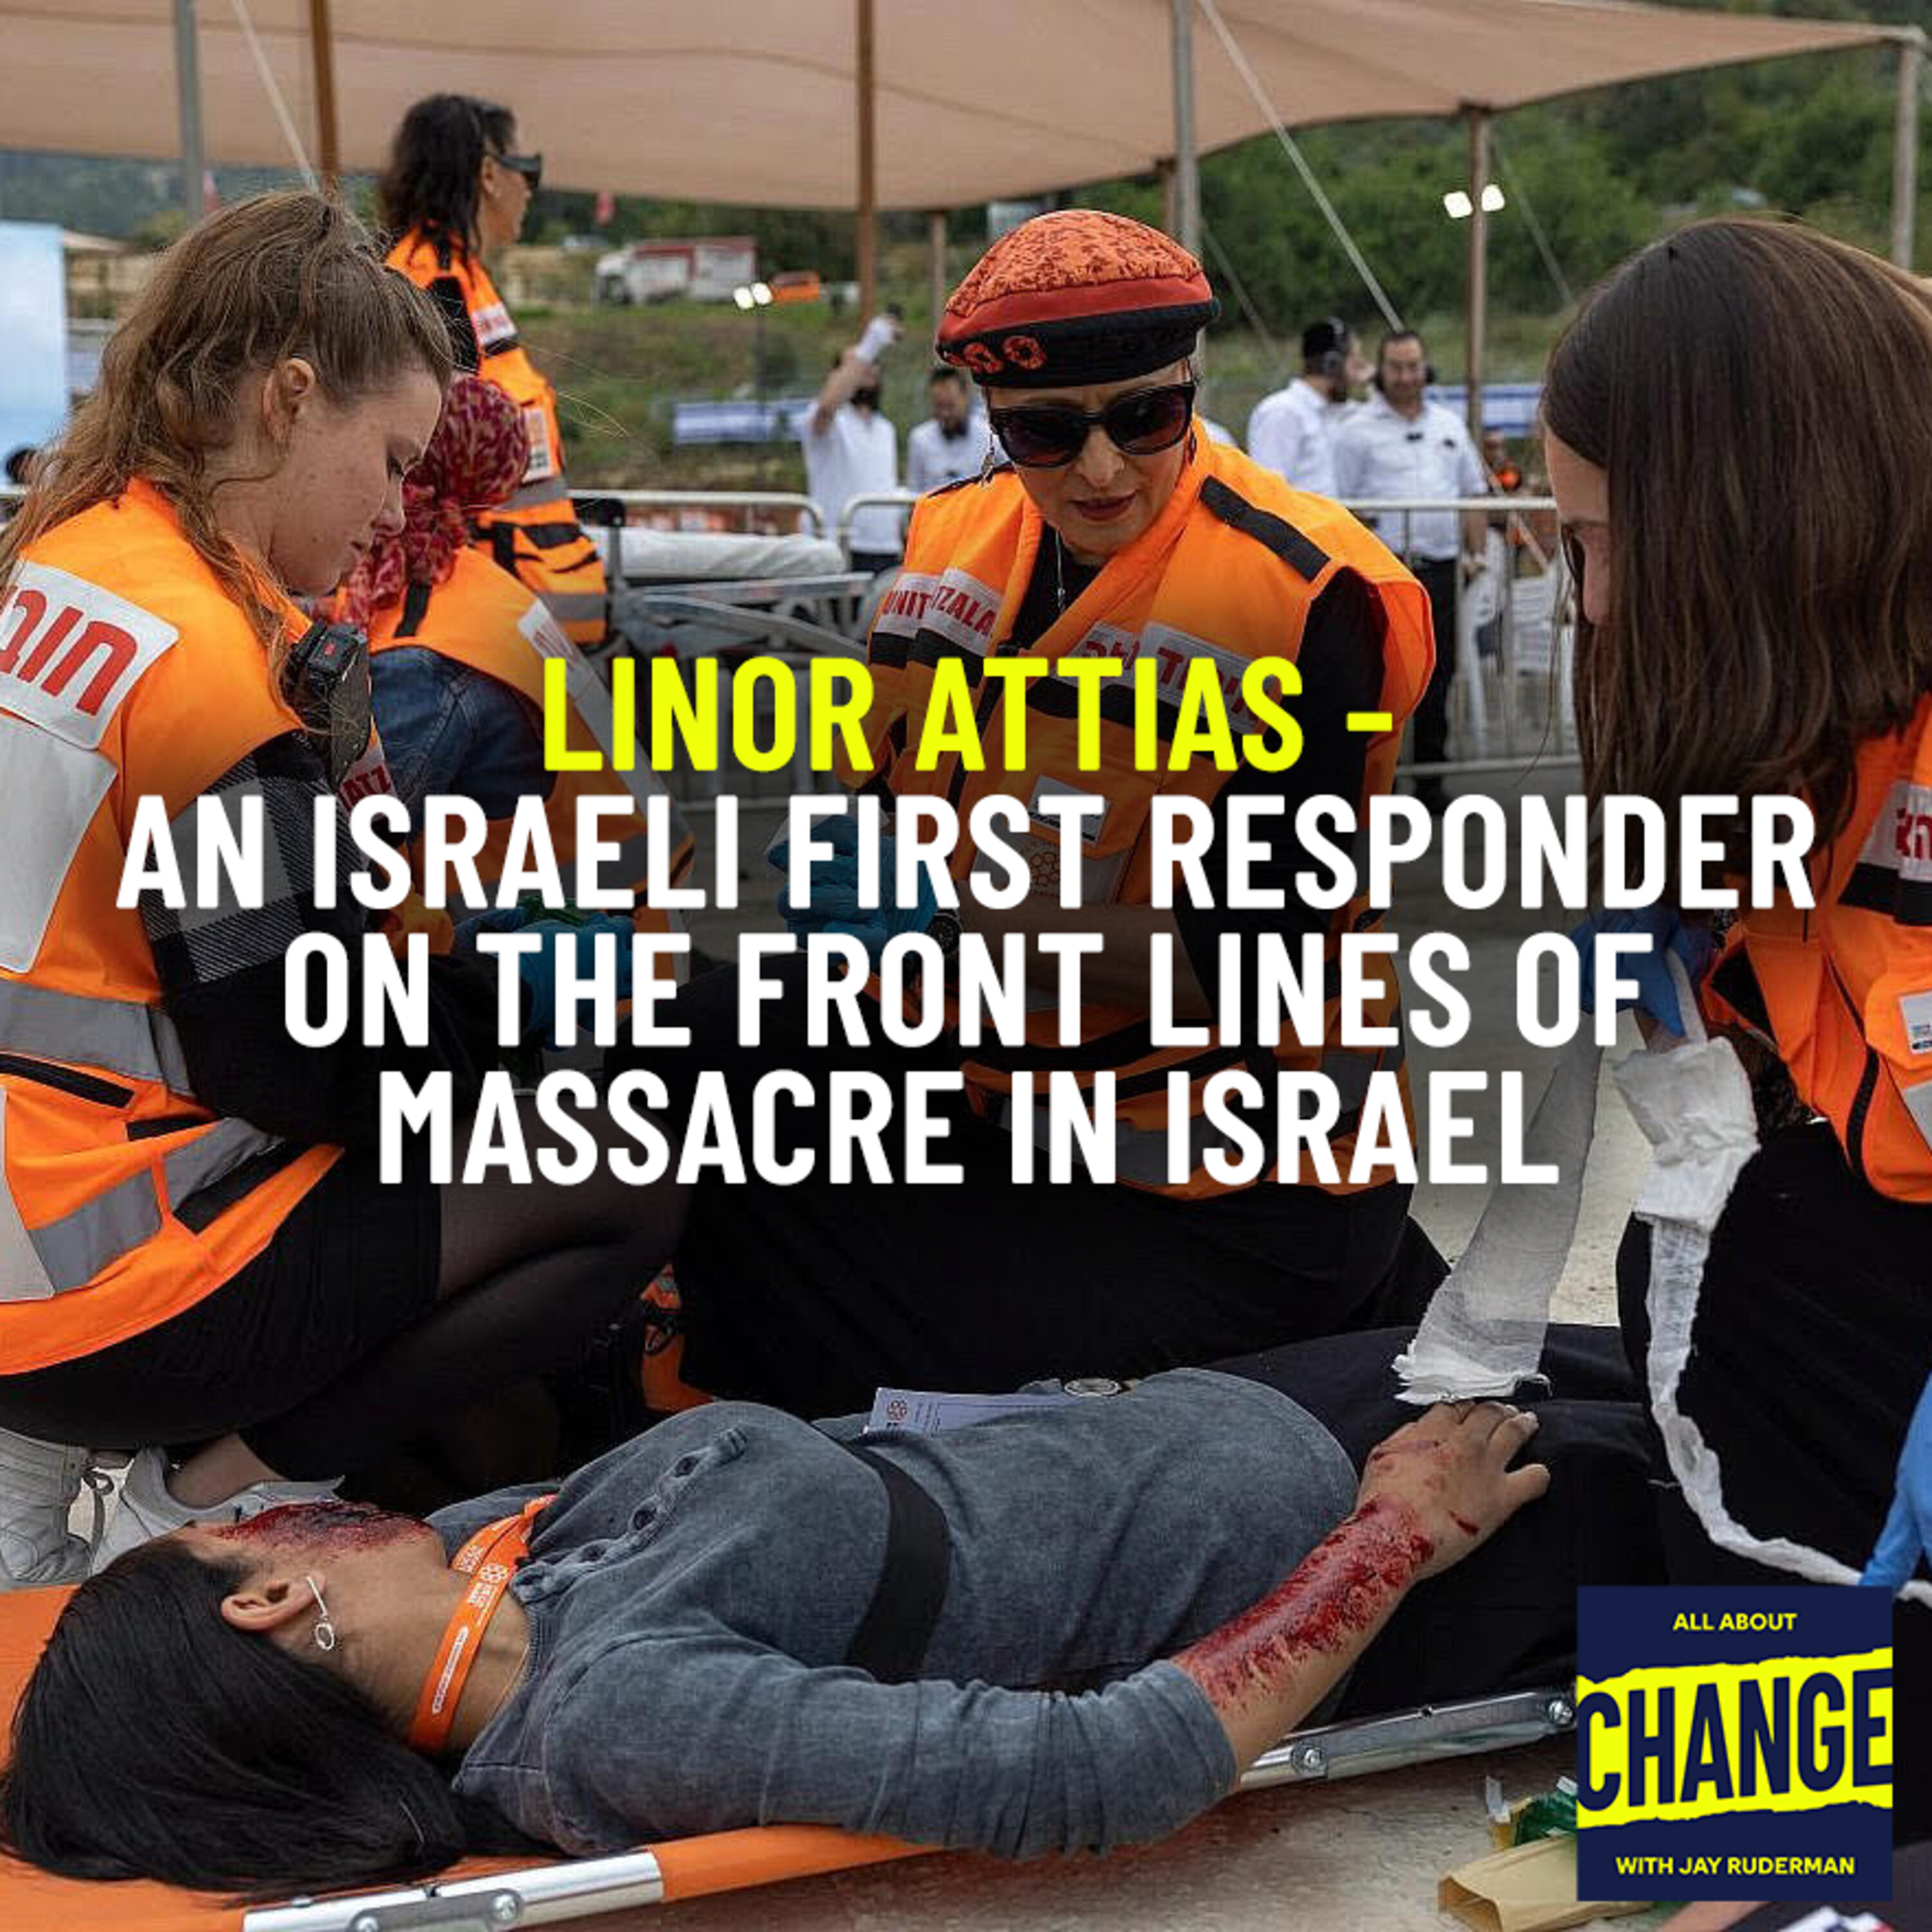 Linor Attias - An Israeli First Responder on the Front Lines of Massacre in Israel